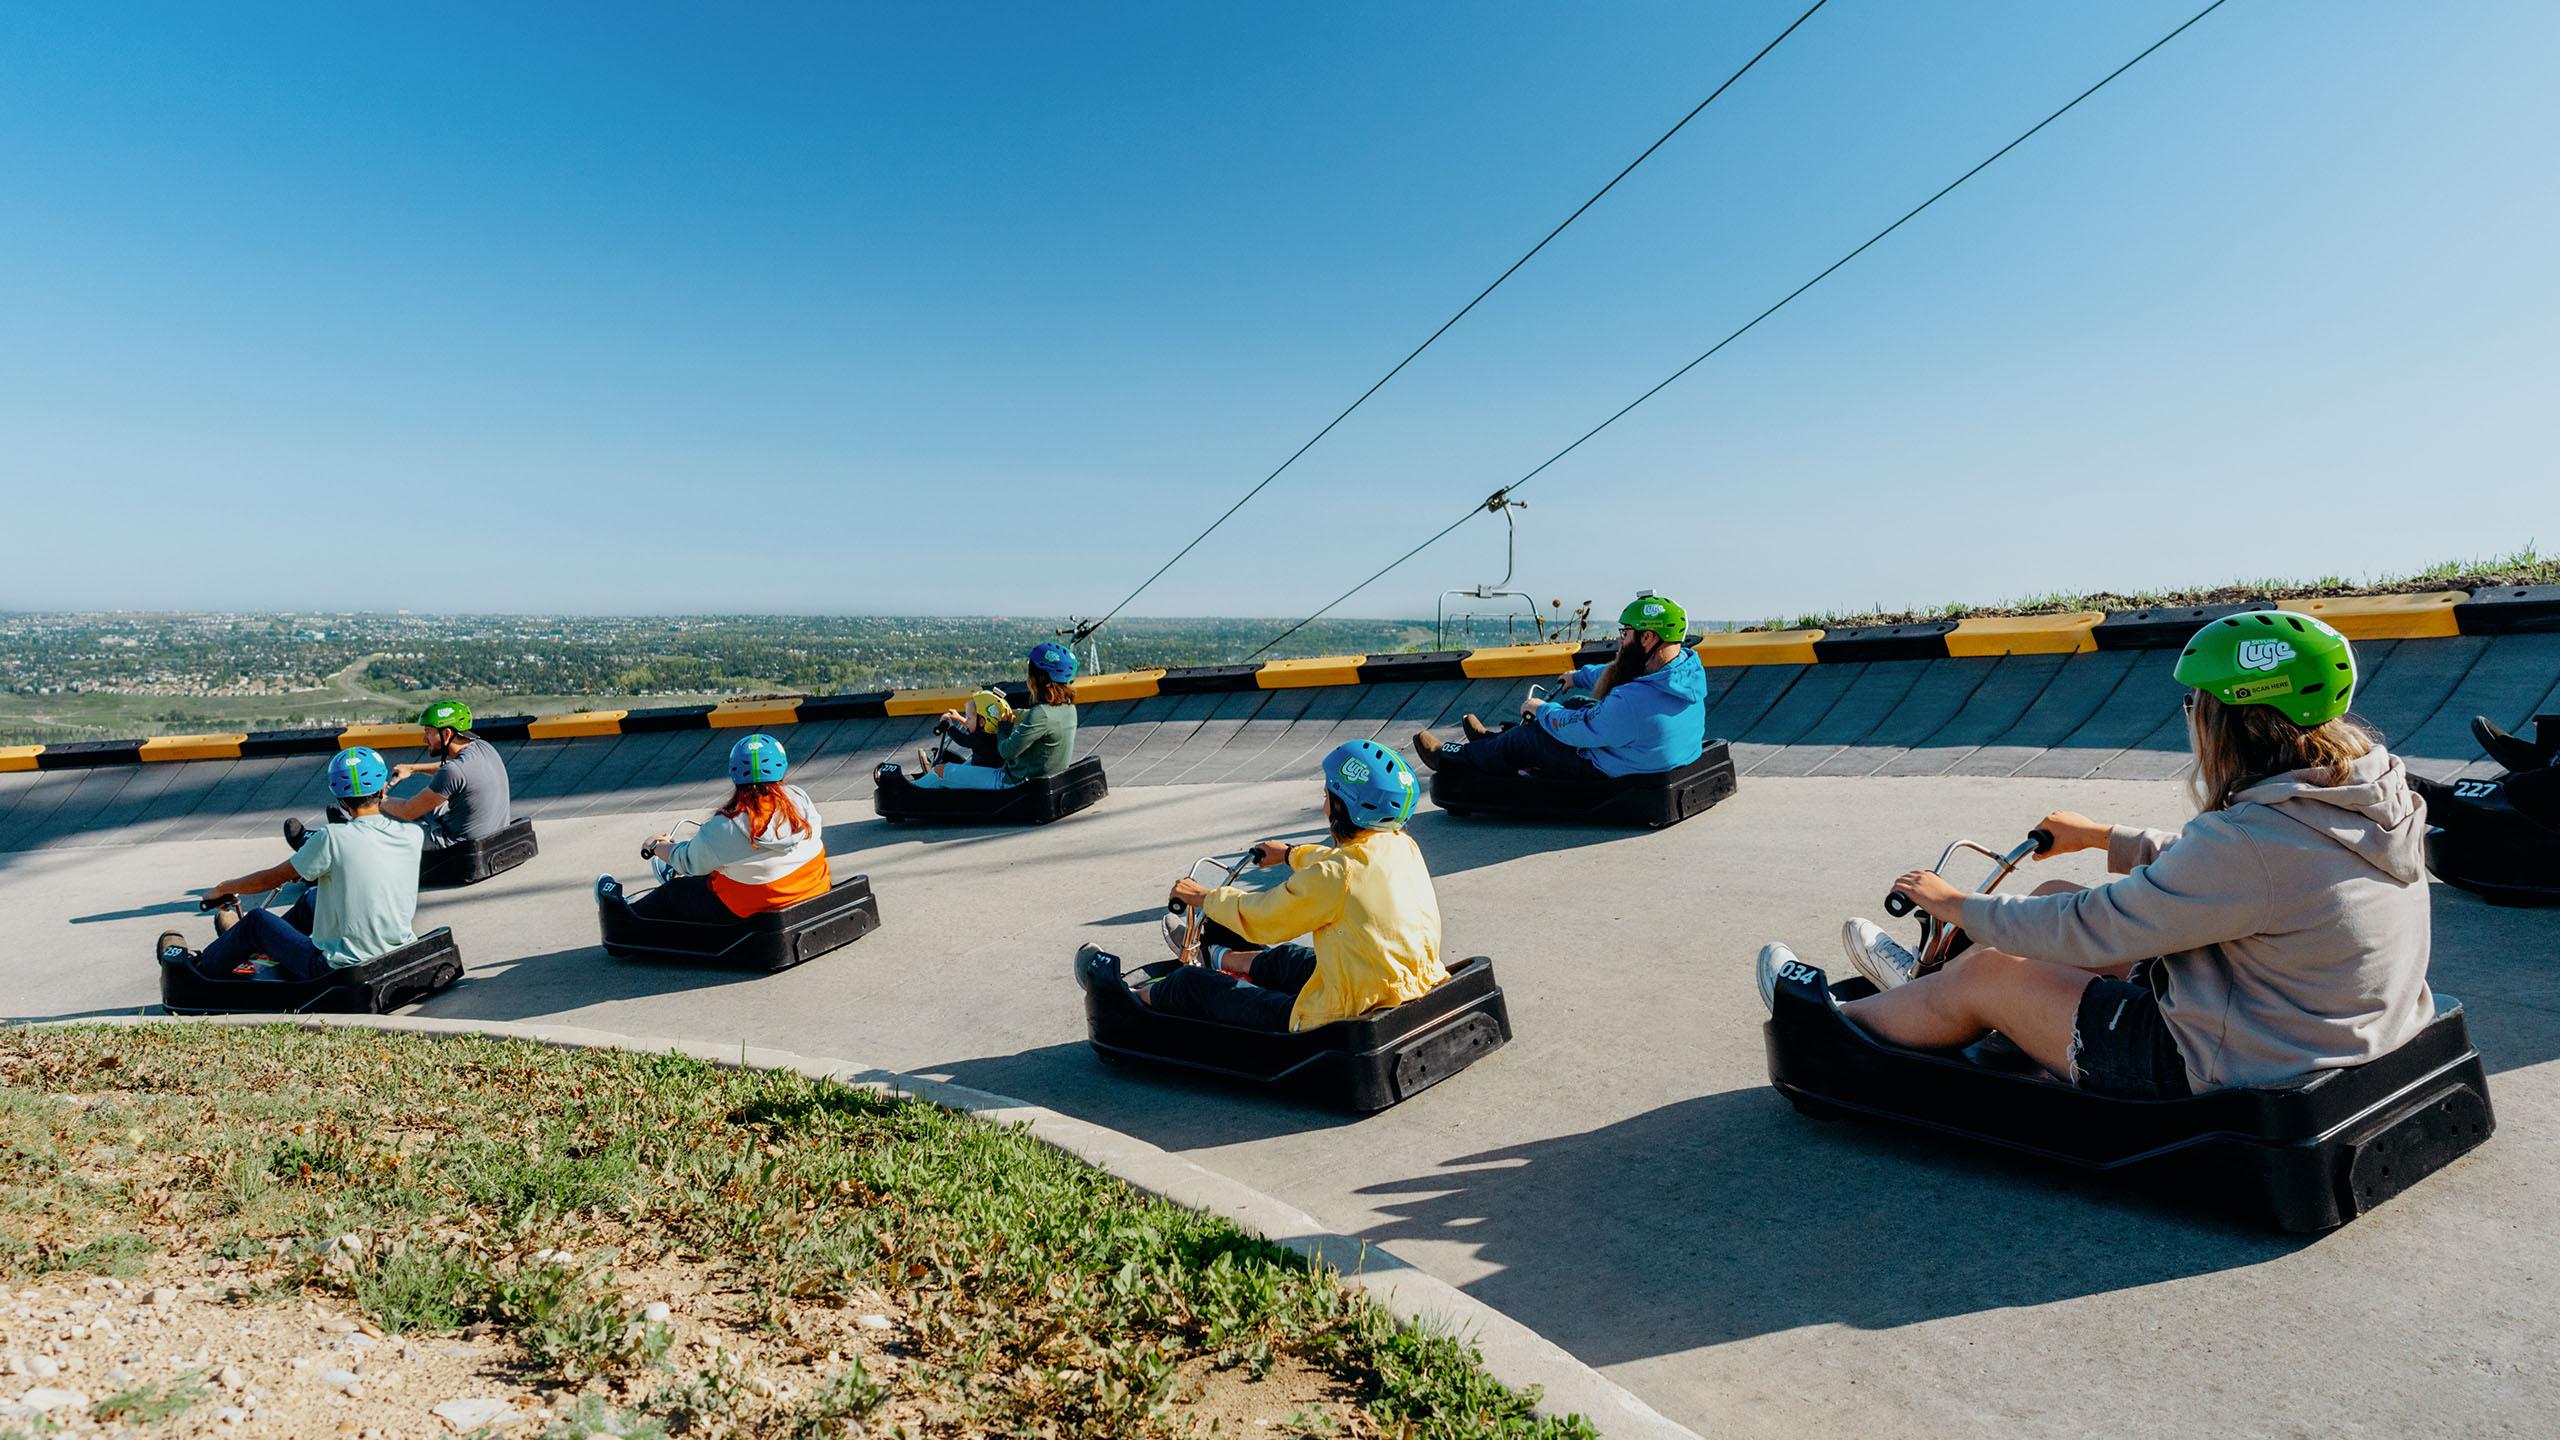 A large group of people cruise around a corner on the track at Downhill Karting Calgary.